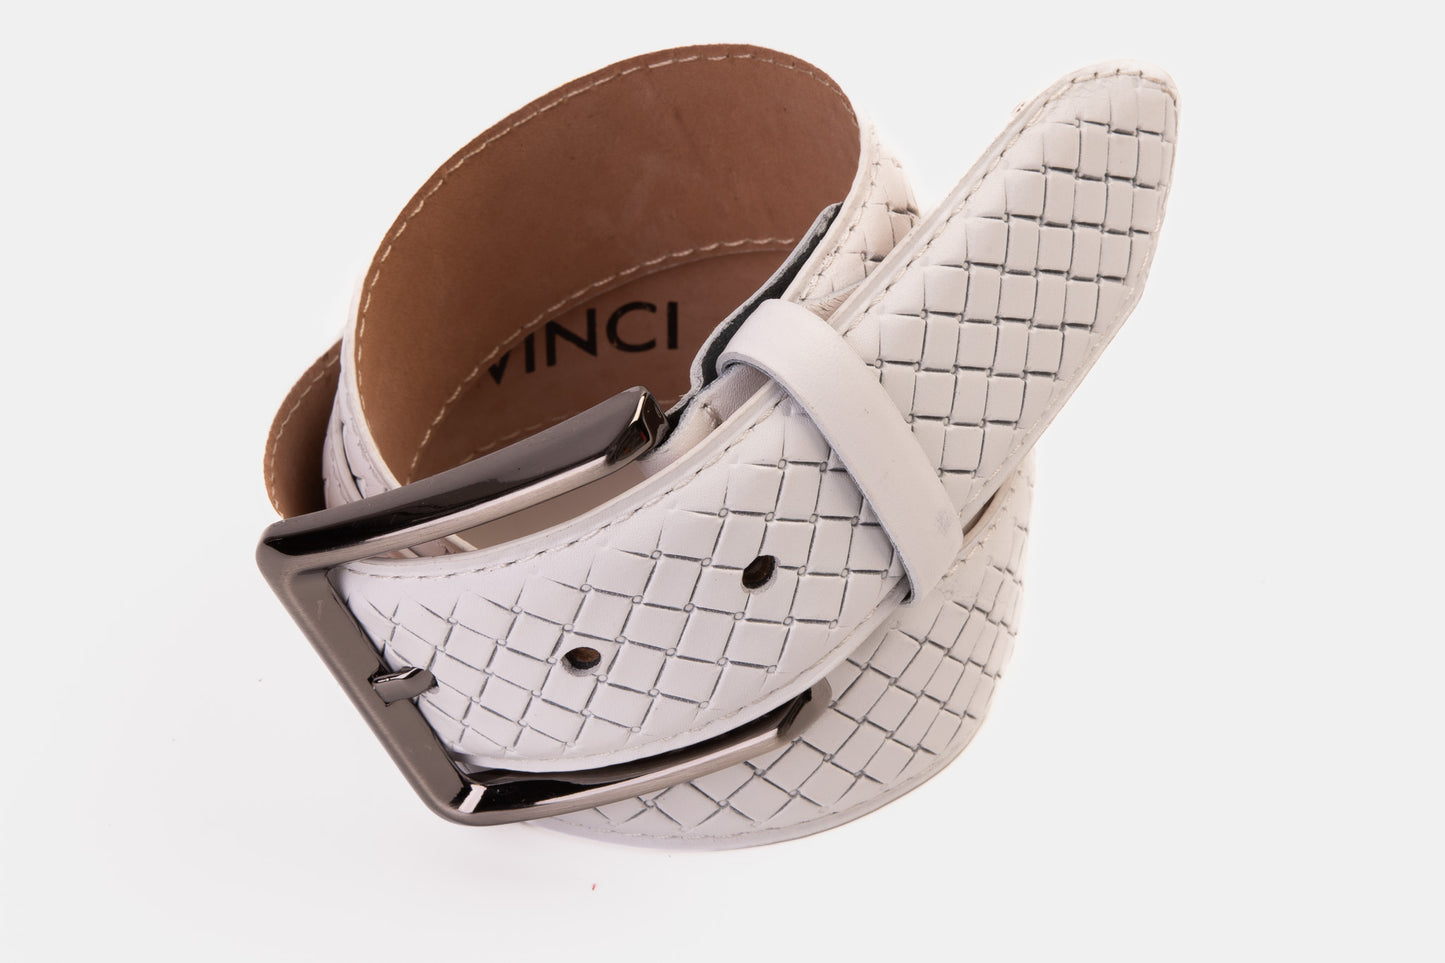 The Turan White Woven Leather Belt